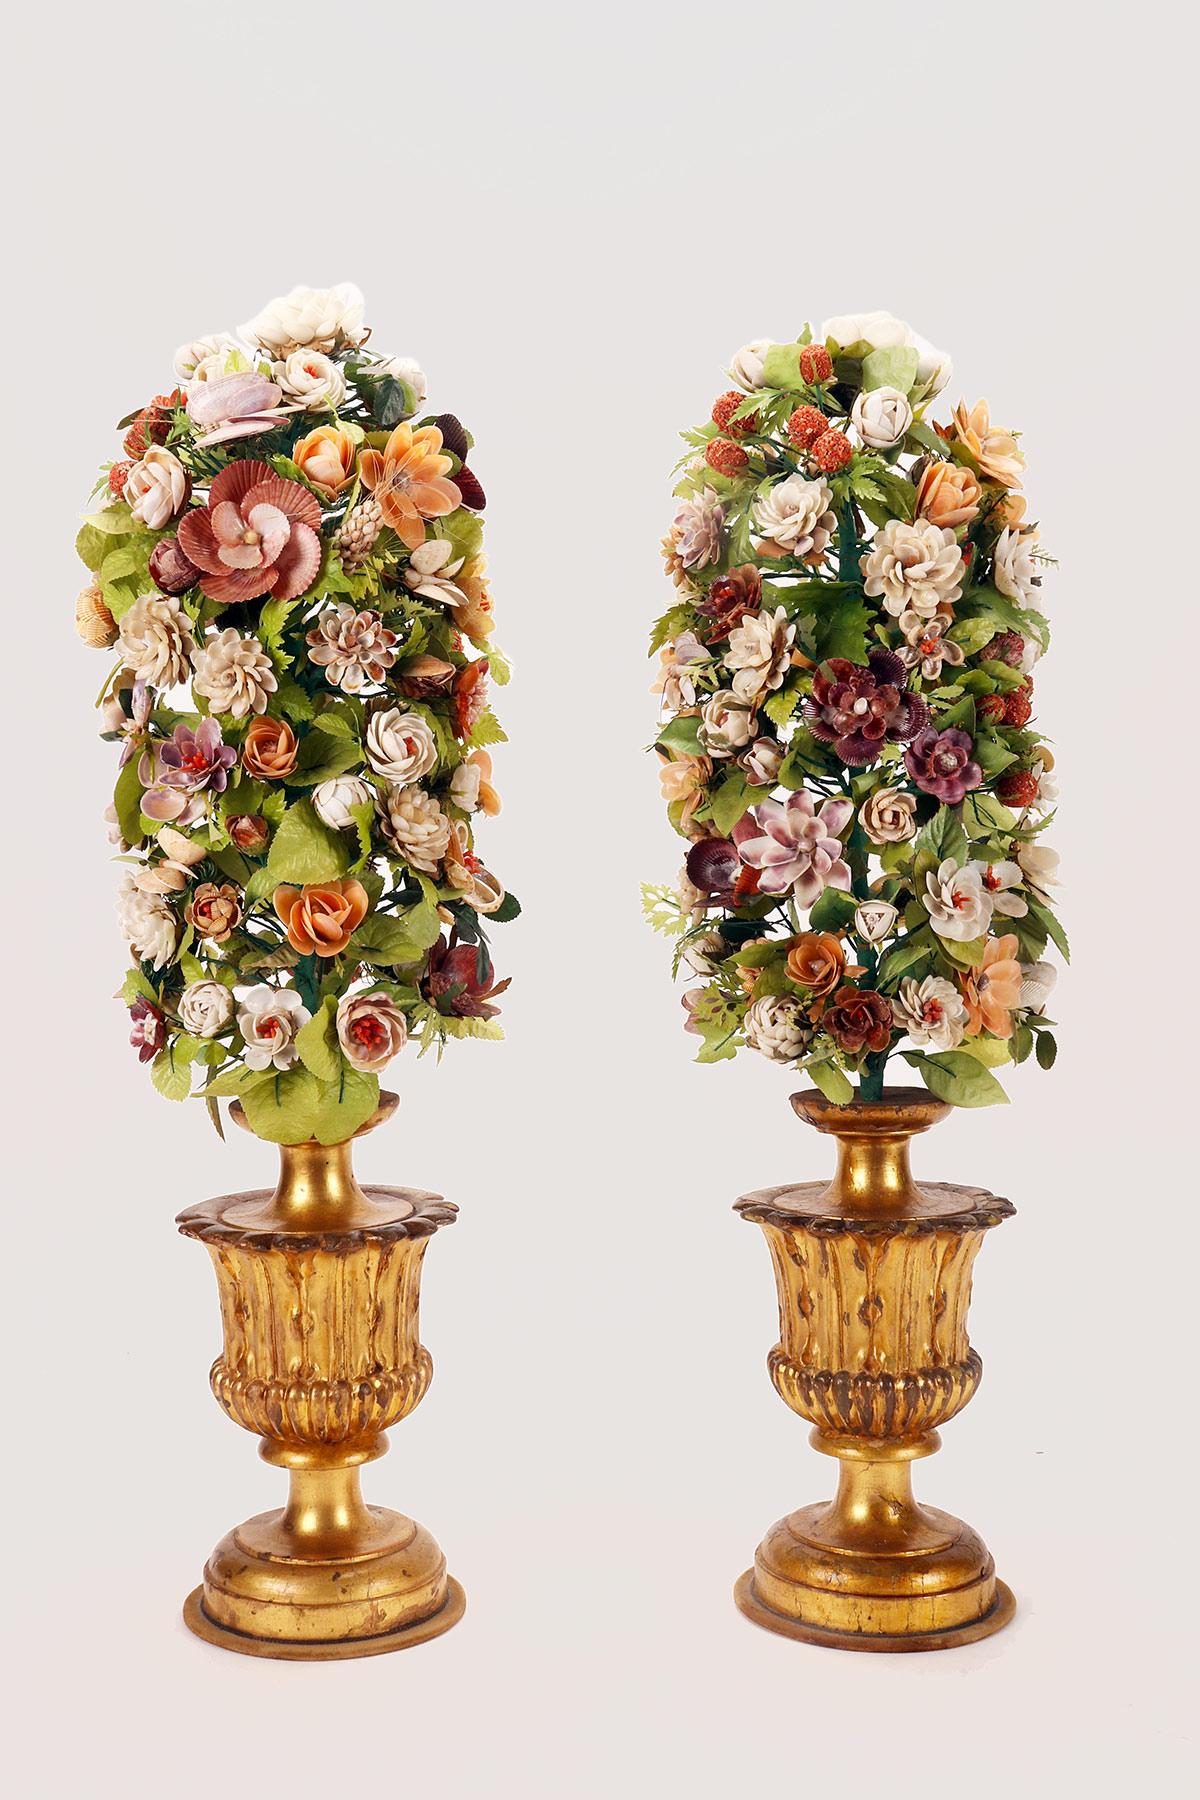 A Victorian pair of shell and coral floral arrangements on carved and gilded wooden base. Each of the two compositions features a base in sculpted and carved fruit wood, gilded which enhances the vase shape with a complex profile.
Round plinth, it